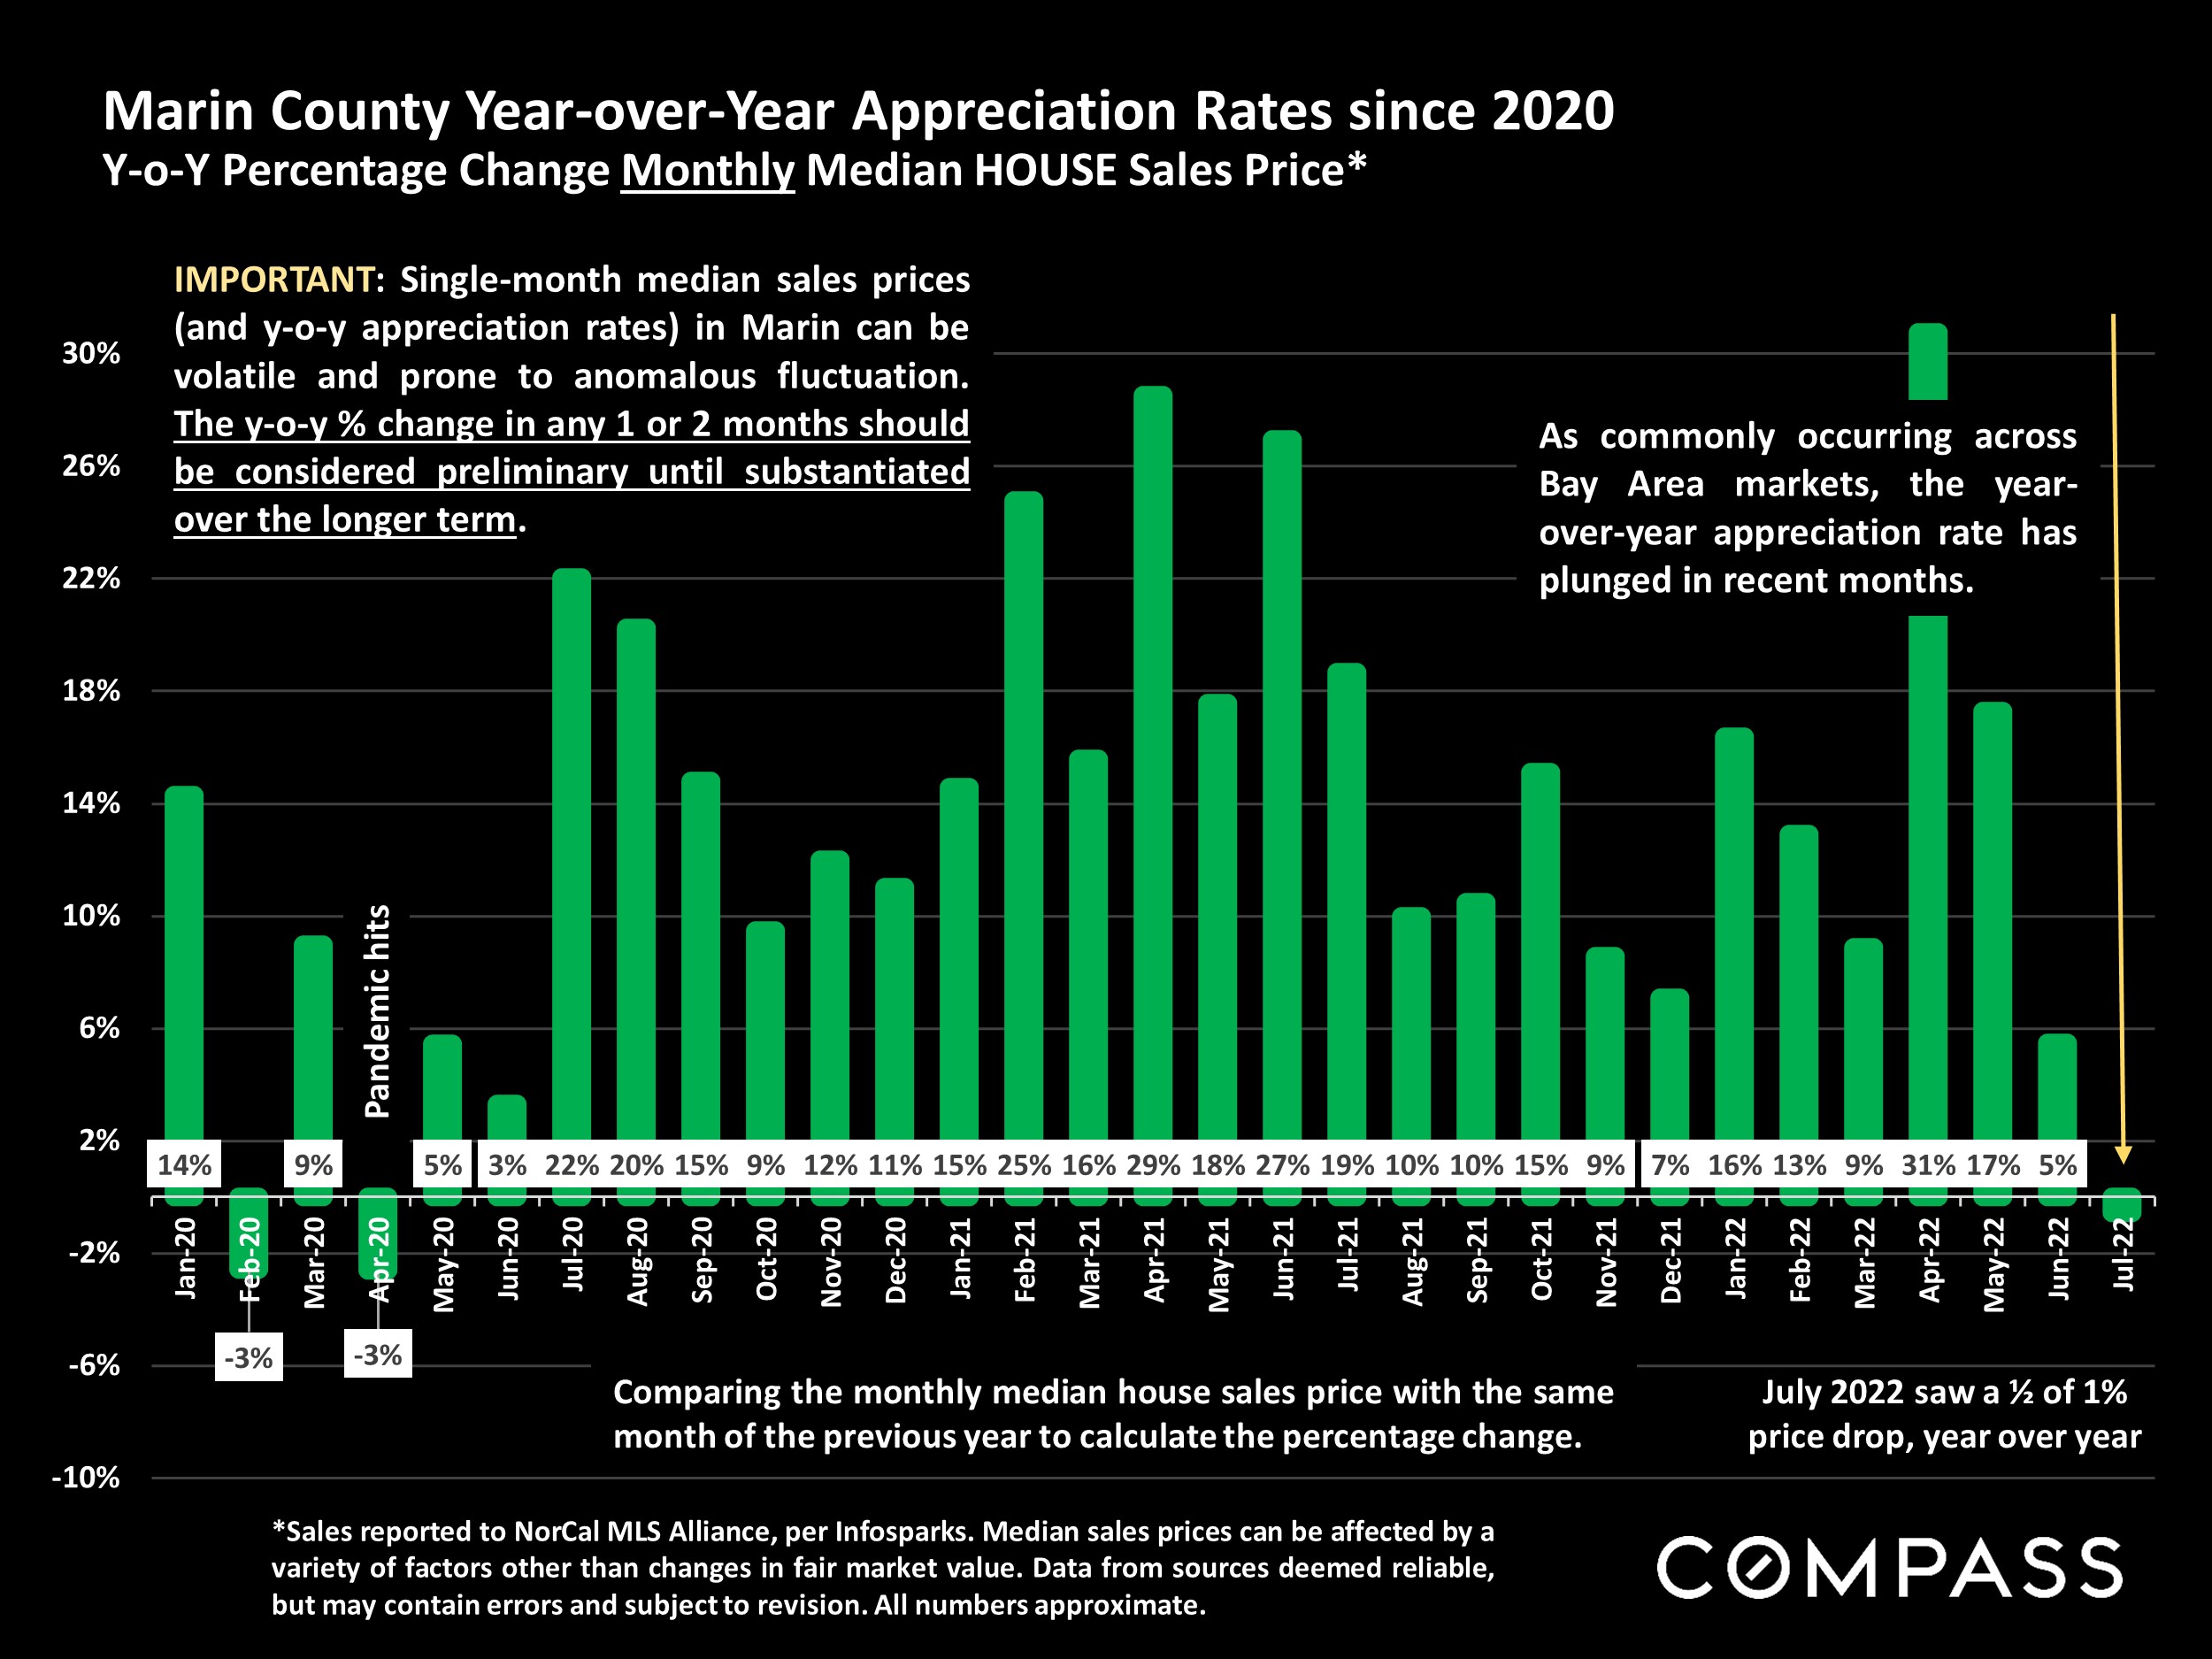 Marin County Year-over-Year Appreciation Rates since 2020